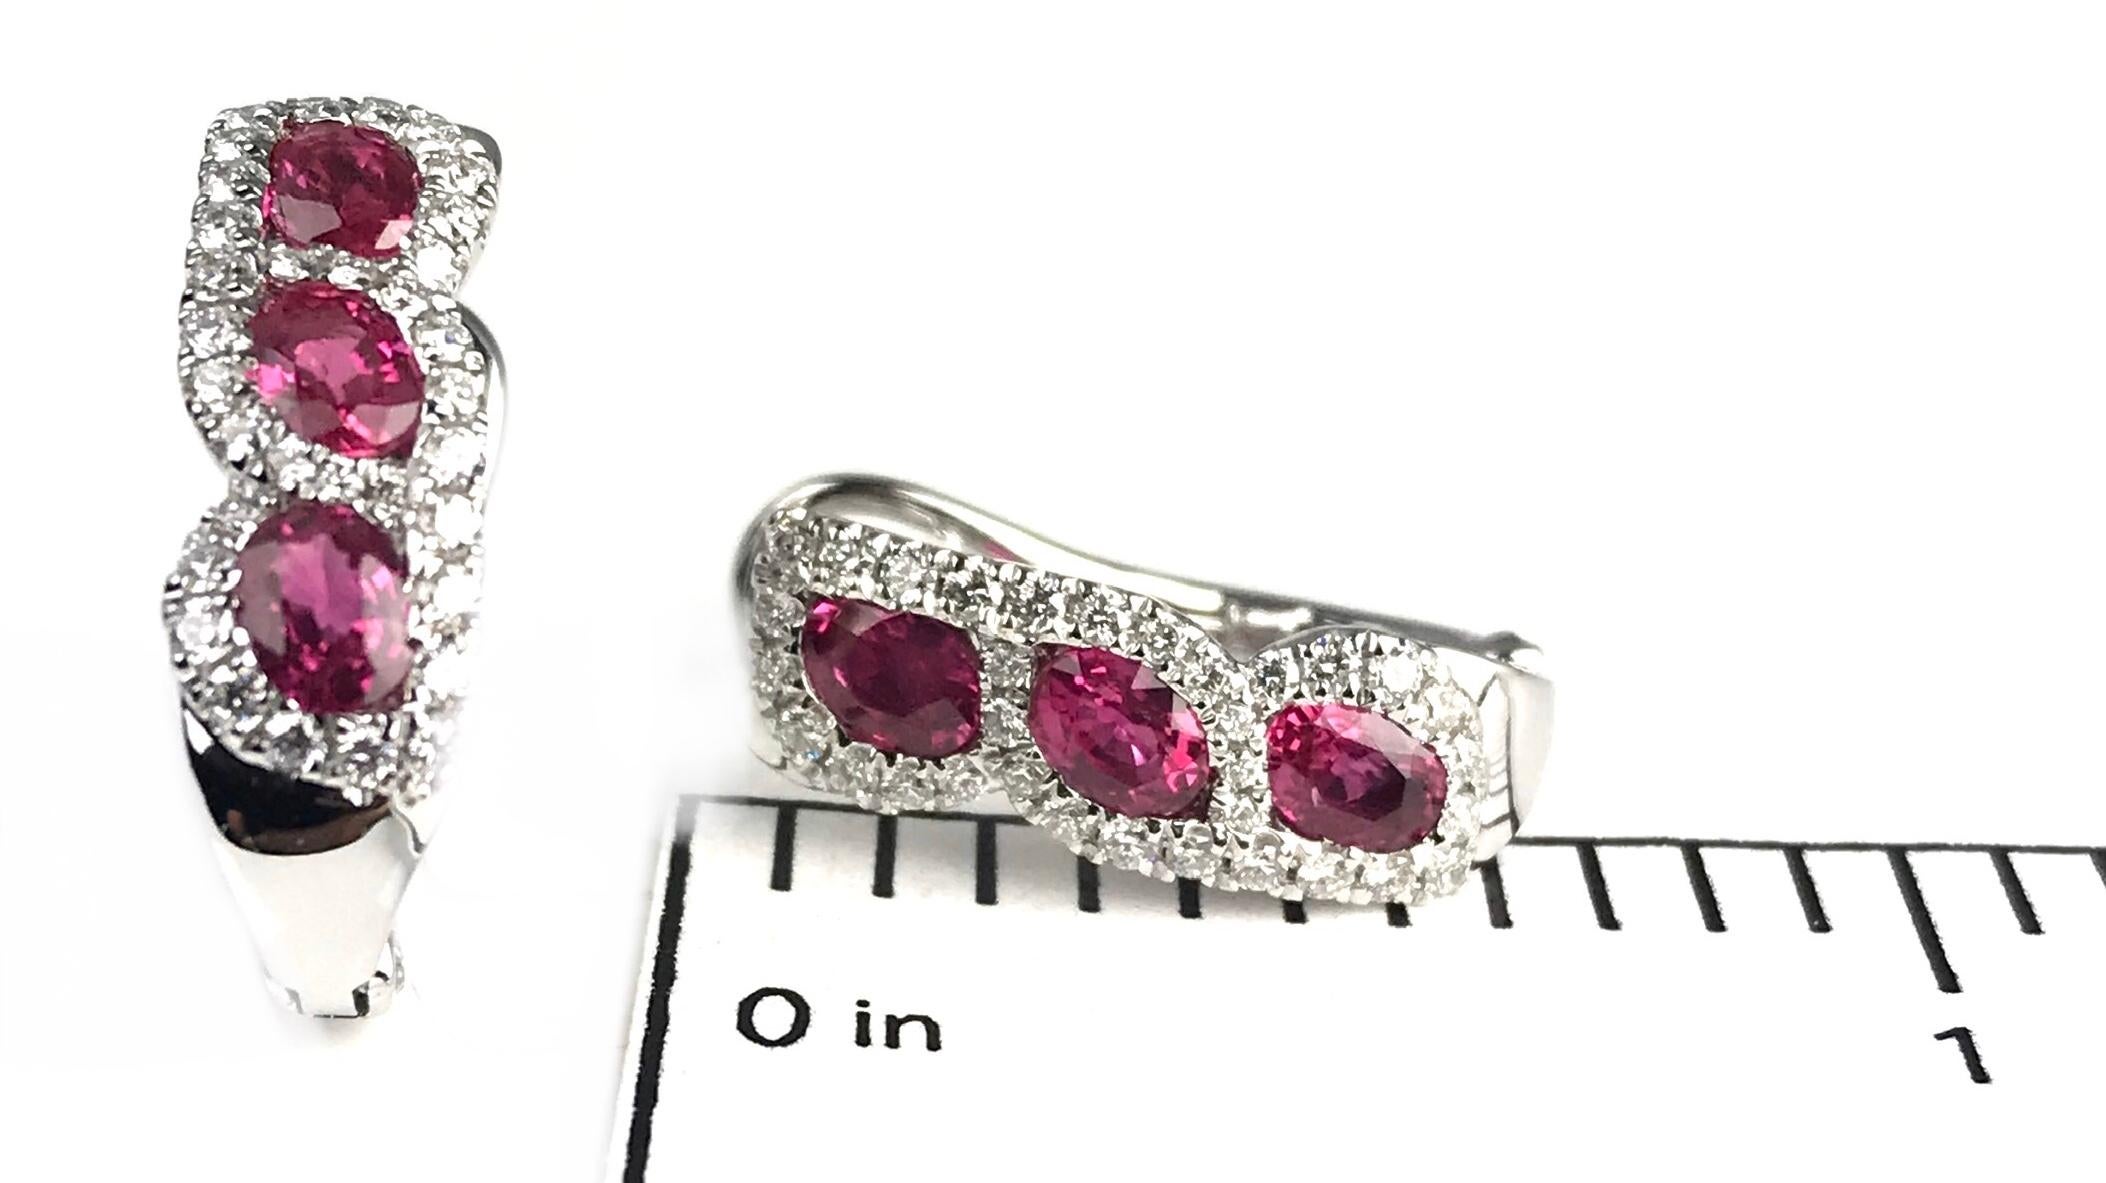 Contemporary DiamondTown 1.34 Carat Marquise Cut Ruby Hoop Earrings with 0.39 Carat Diamonds